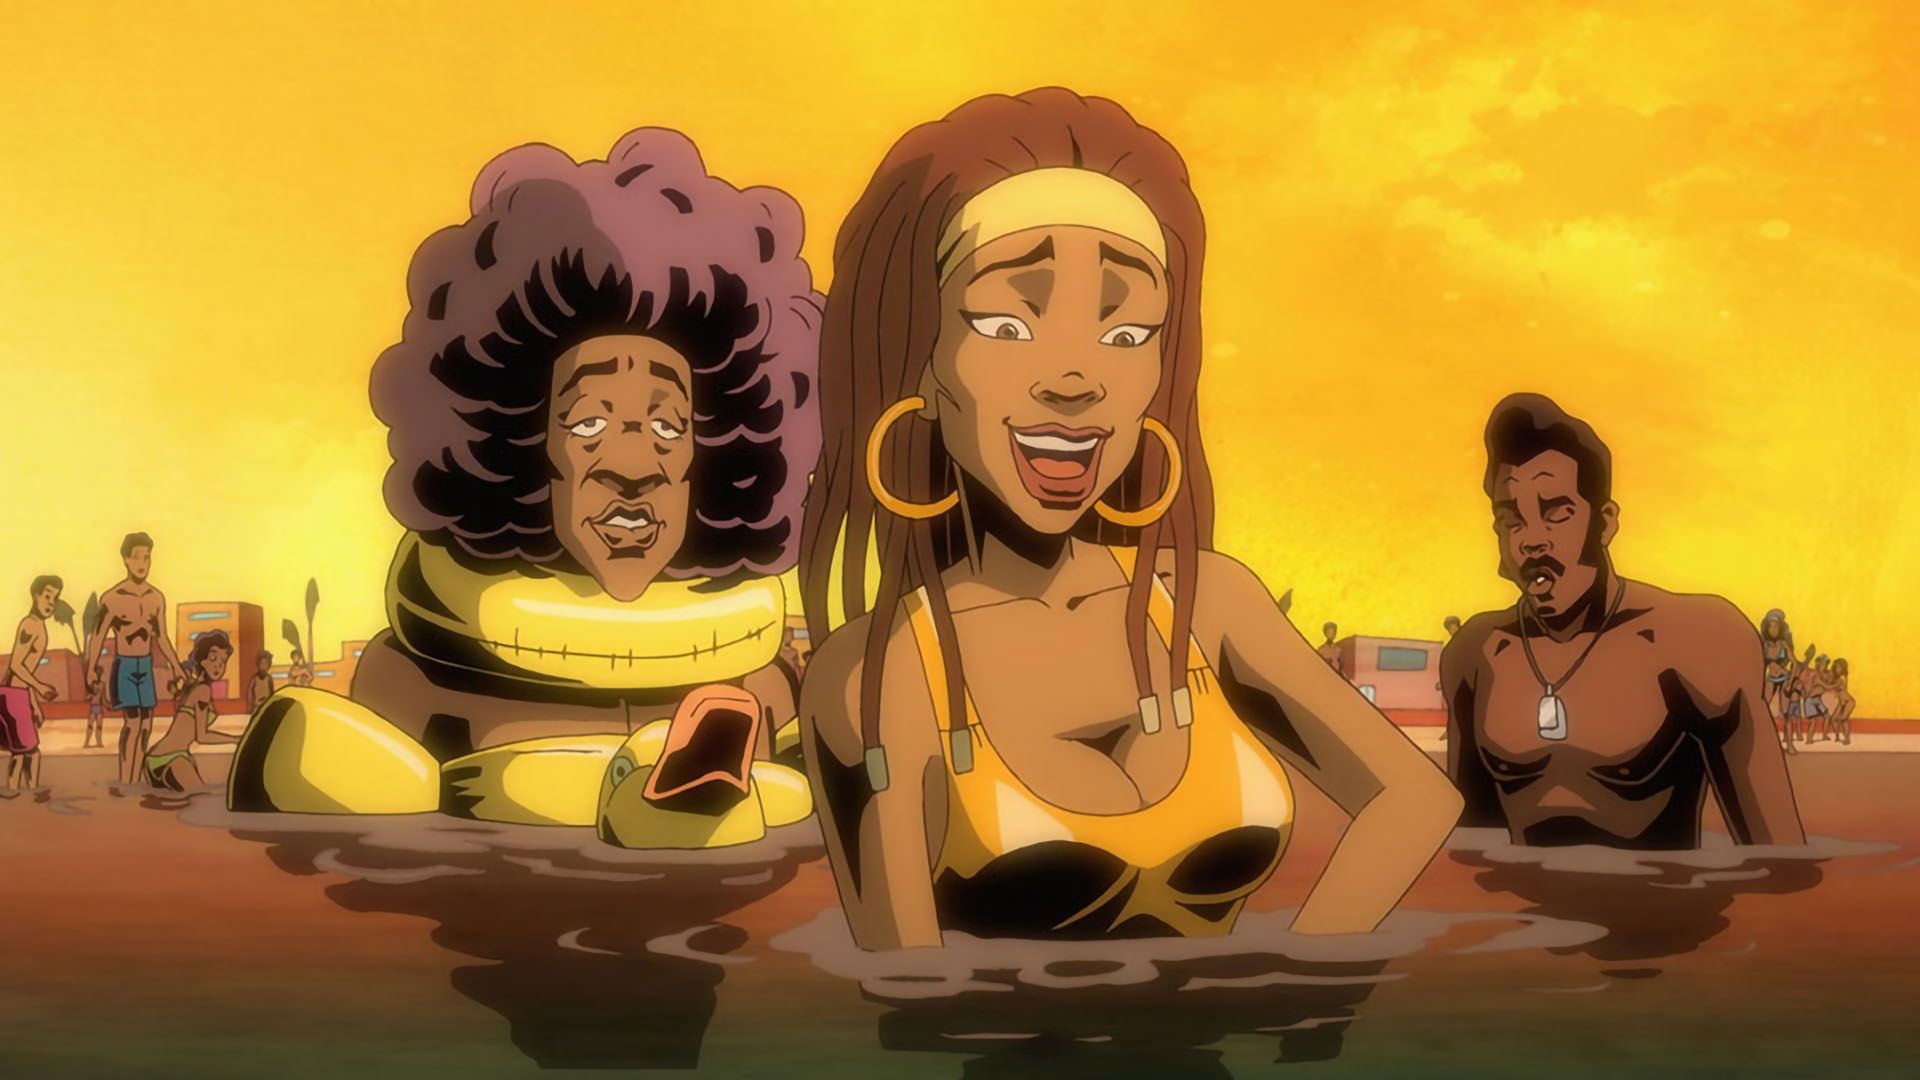 Dynamite Black Tail Porn - How Honeybee Got Her Groove Back' or 'Sexodus' or 'Night of the Living  Dickheads' - S2 EP4 - Black Dynamite